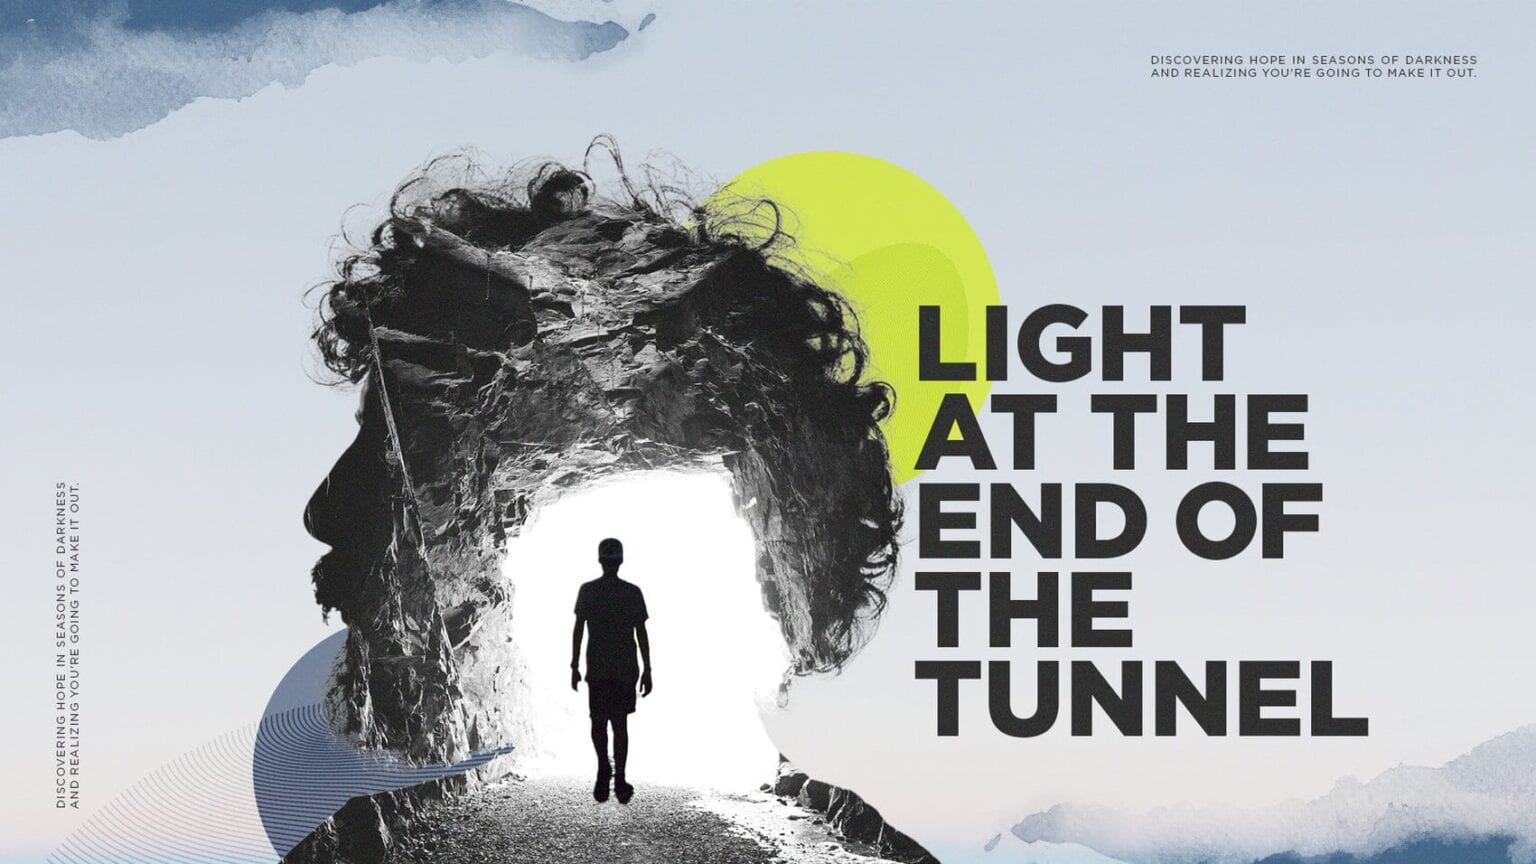 Light-at-the-End-of-the-TunnelHD-Title-Concept-2-ALT